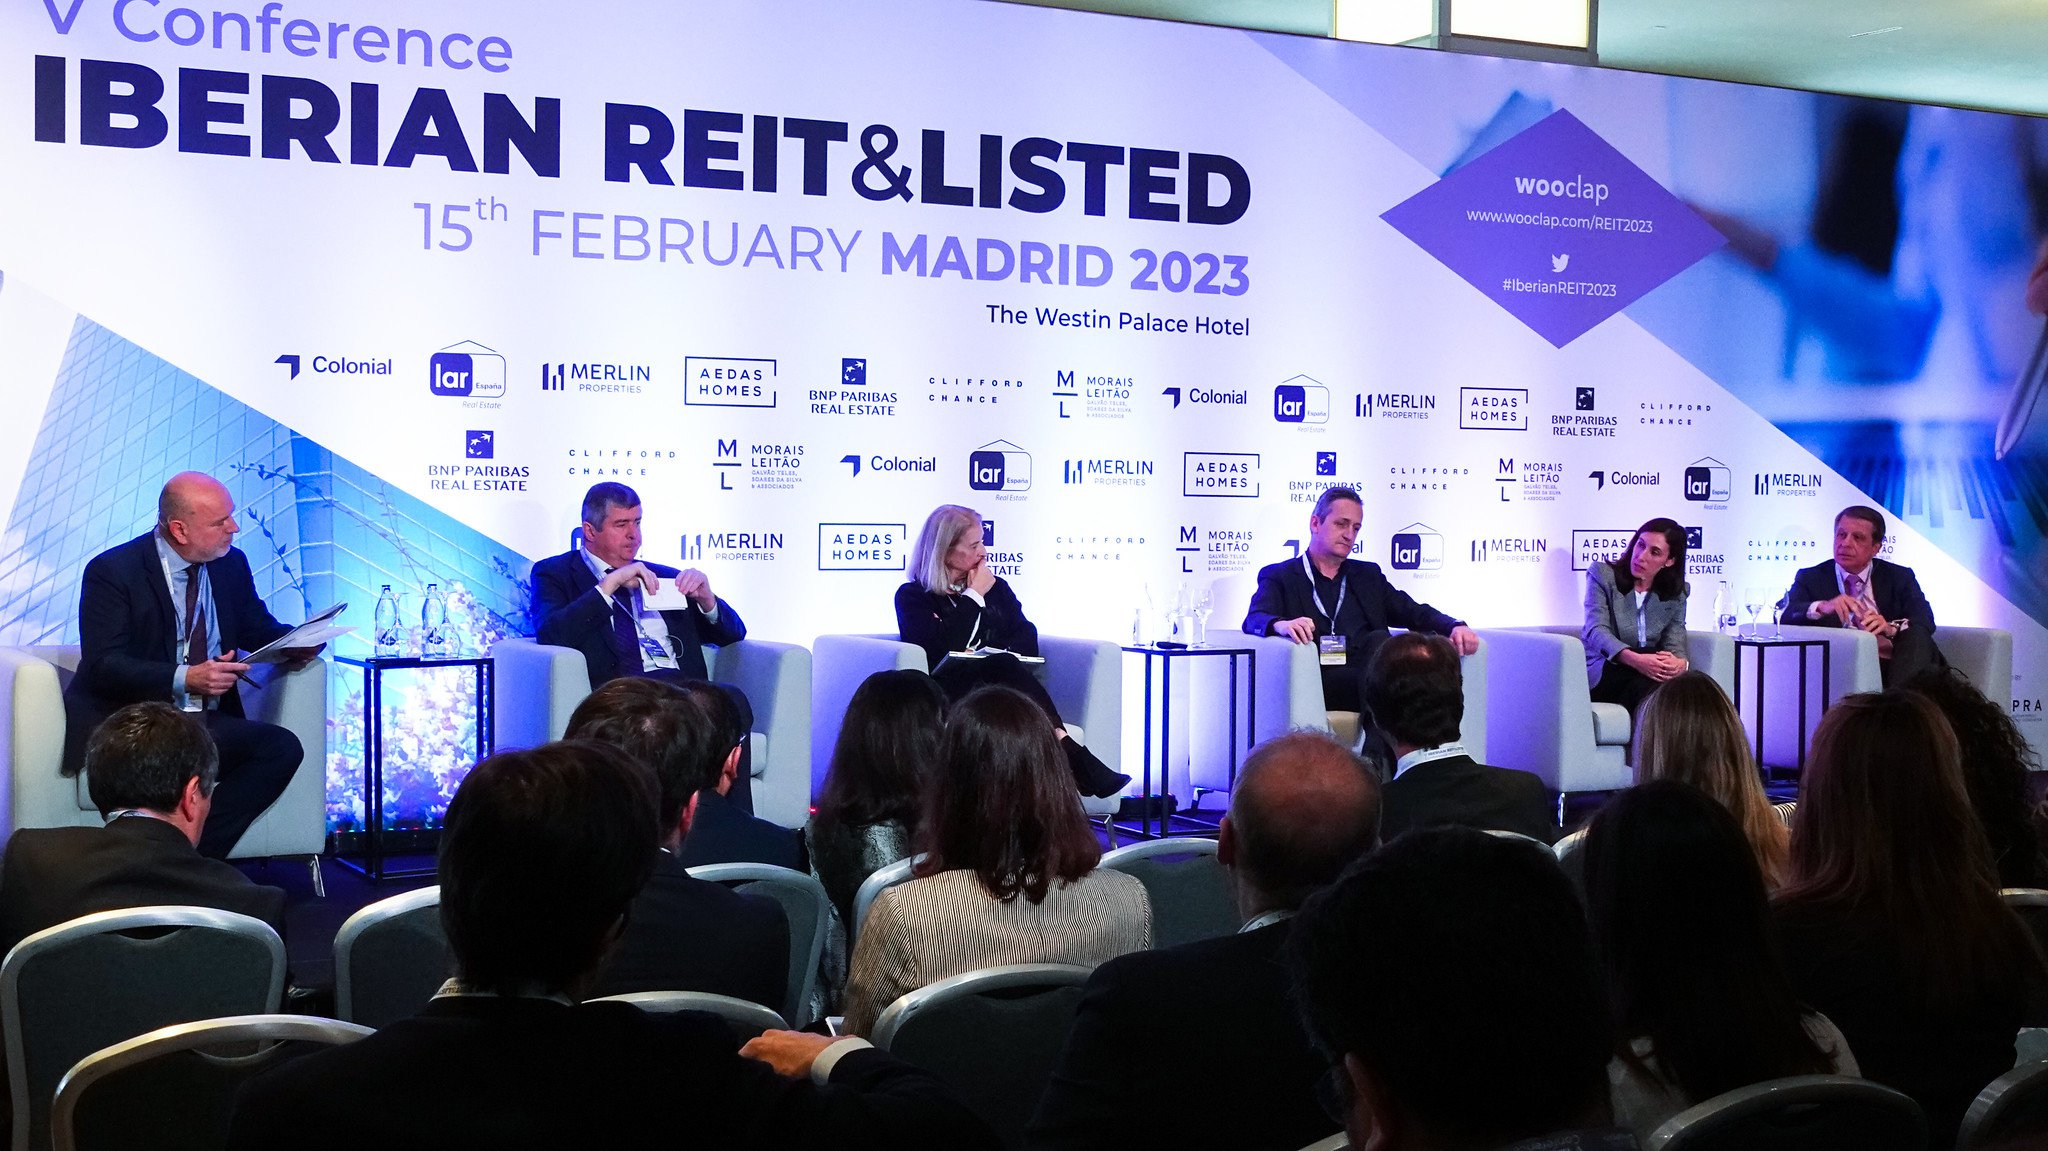 V IBERIAN REIT & LISTED CONFERENCE (2023) | THIRD ROUNDTABLE DEBATE